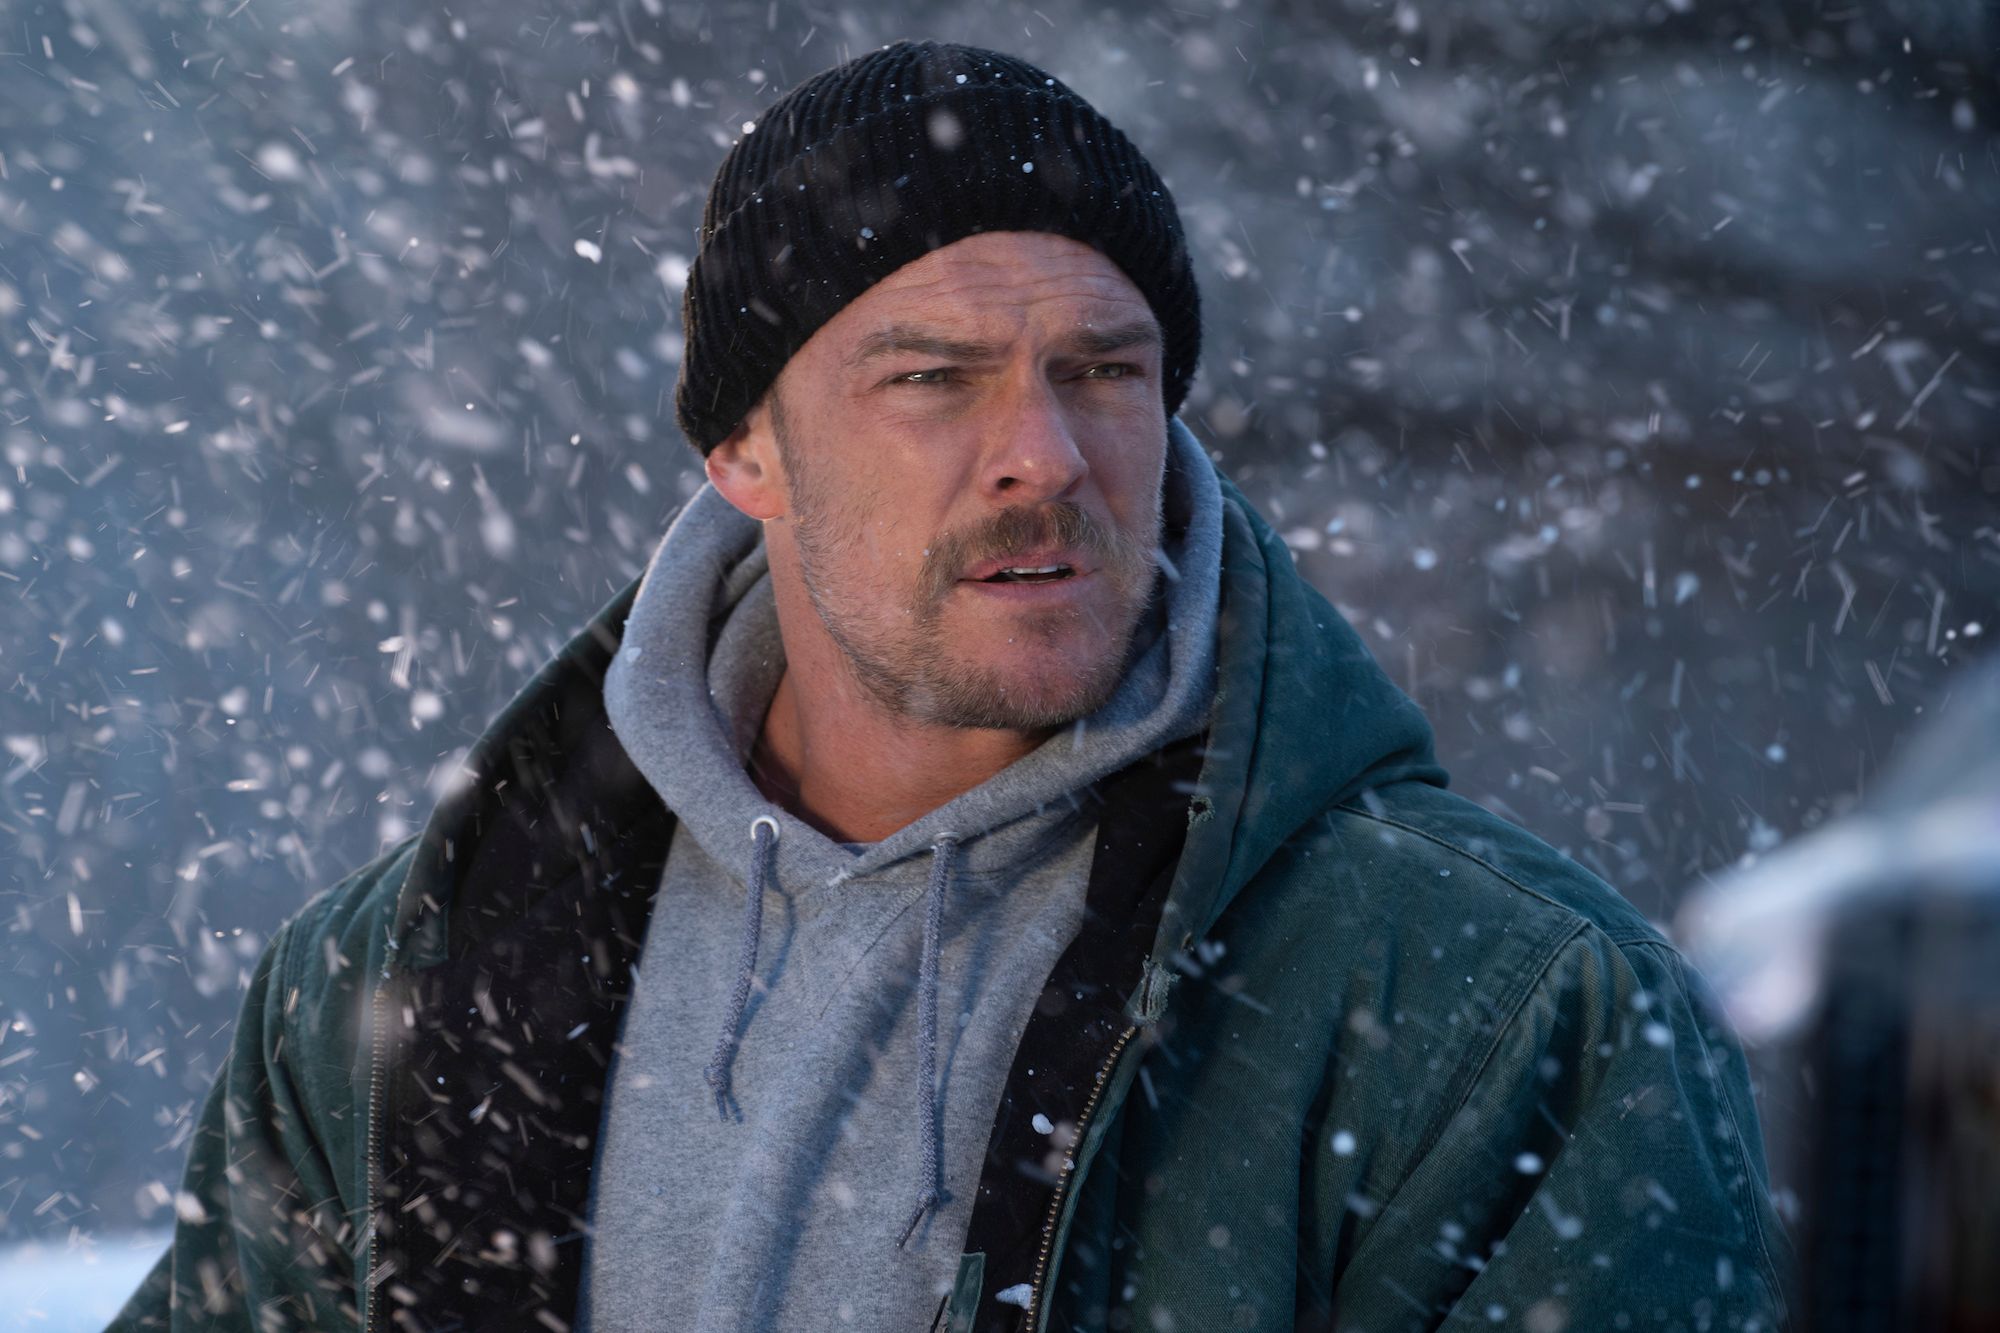 Alan Ritchson as Ed Schmitt in the Snow in Ordinary Angels